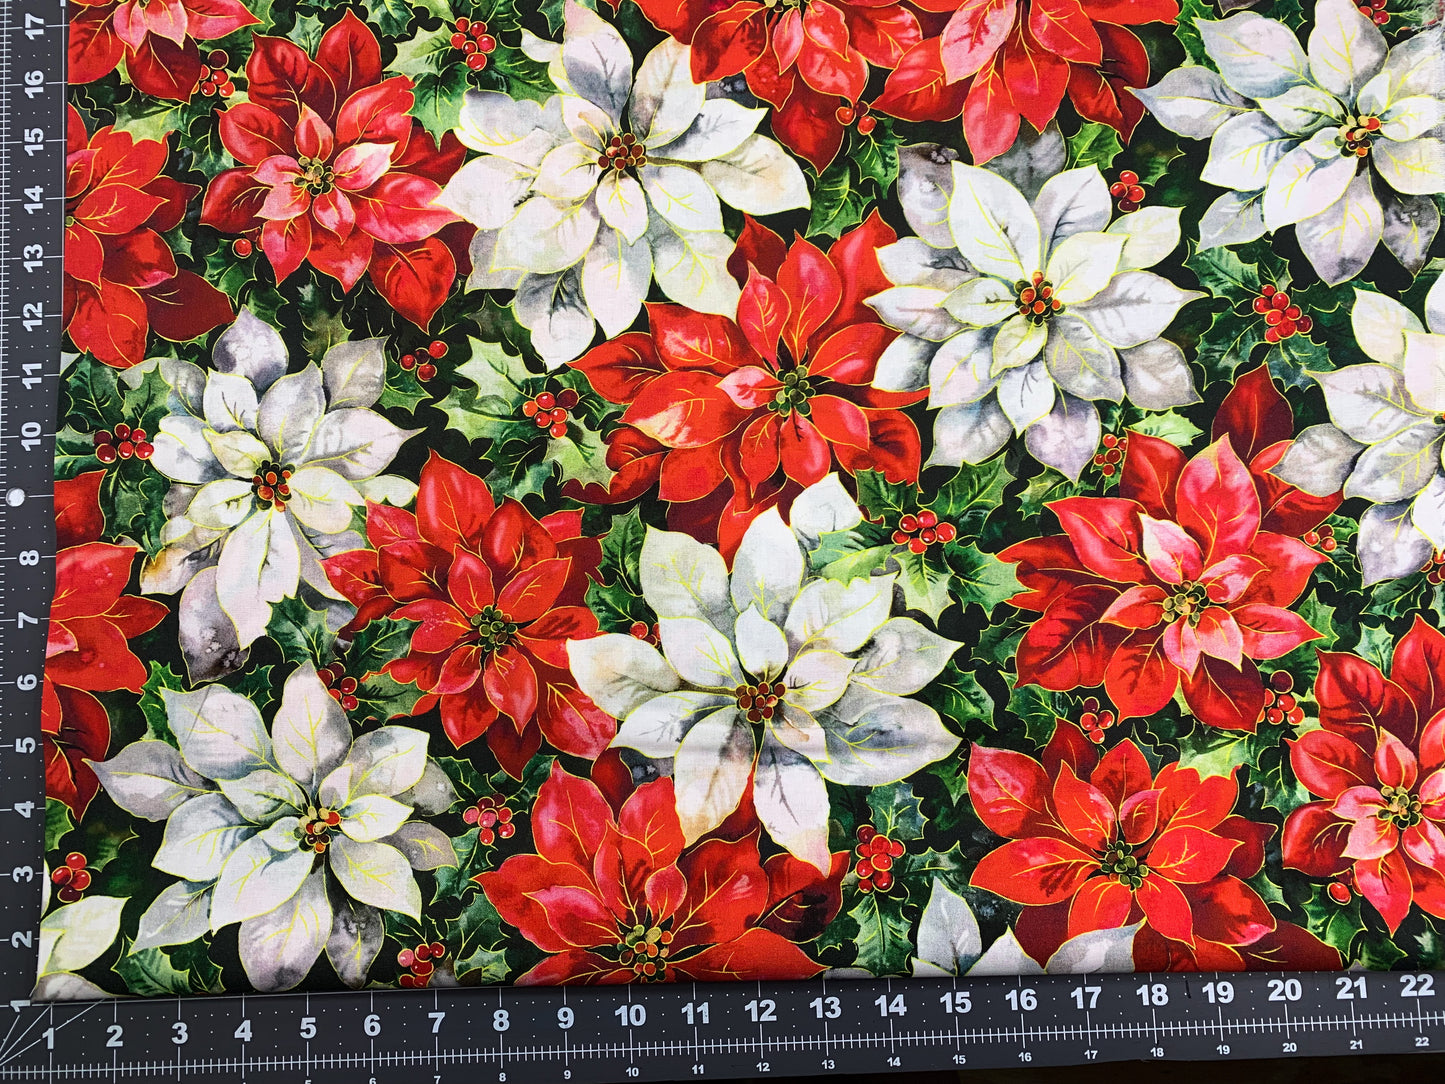 Big White and Red Poinsettia flower fabric Christmas floral fabric